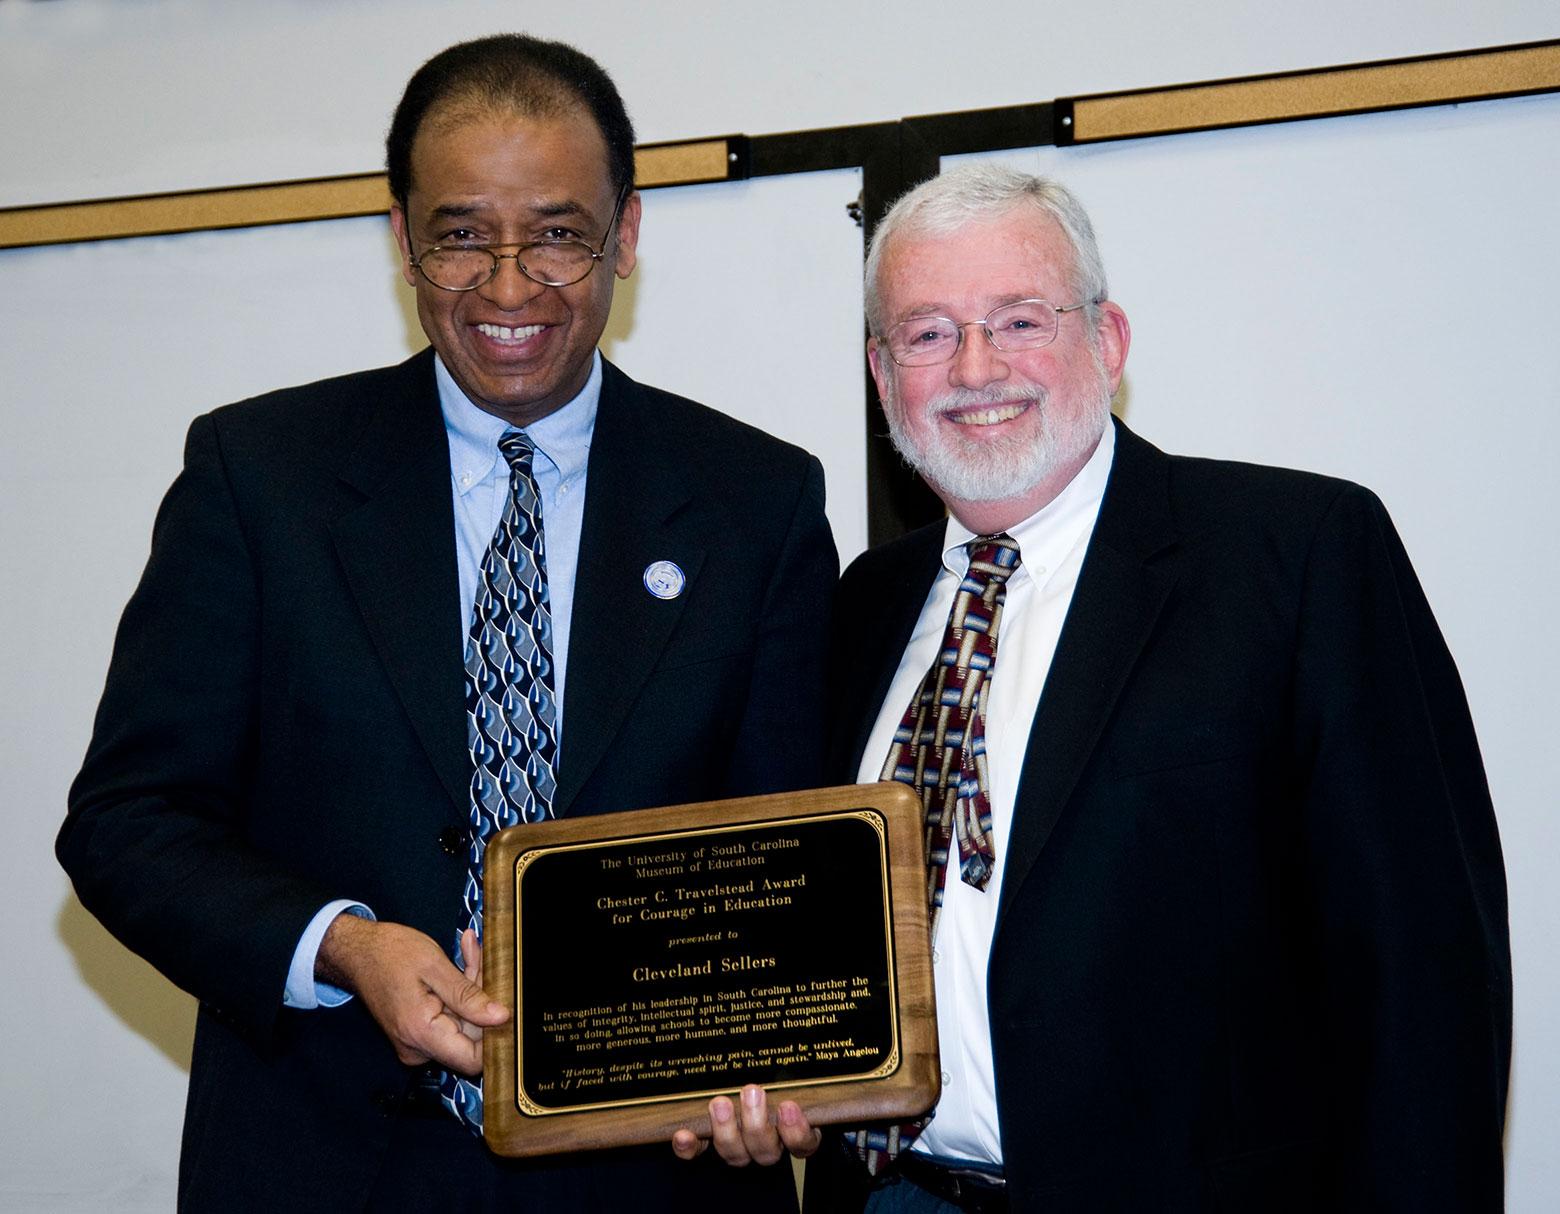 Cleveland L. Sellers Jr. (l) accepting the Travelstead Award for Courage in Education from Coleman Travelstead, the son of Chester C. Travelstead